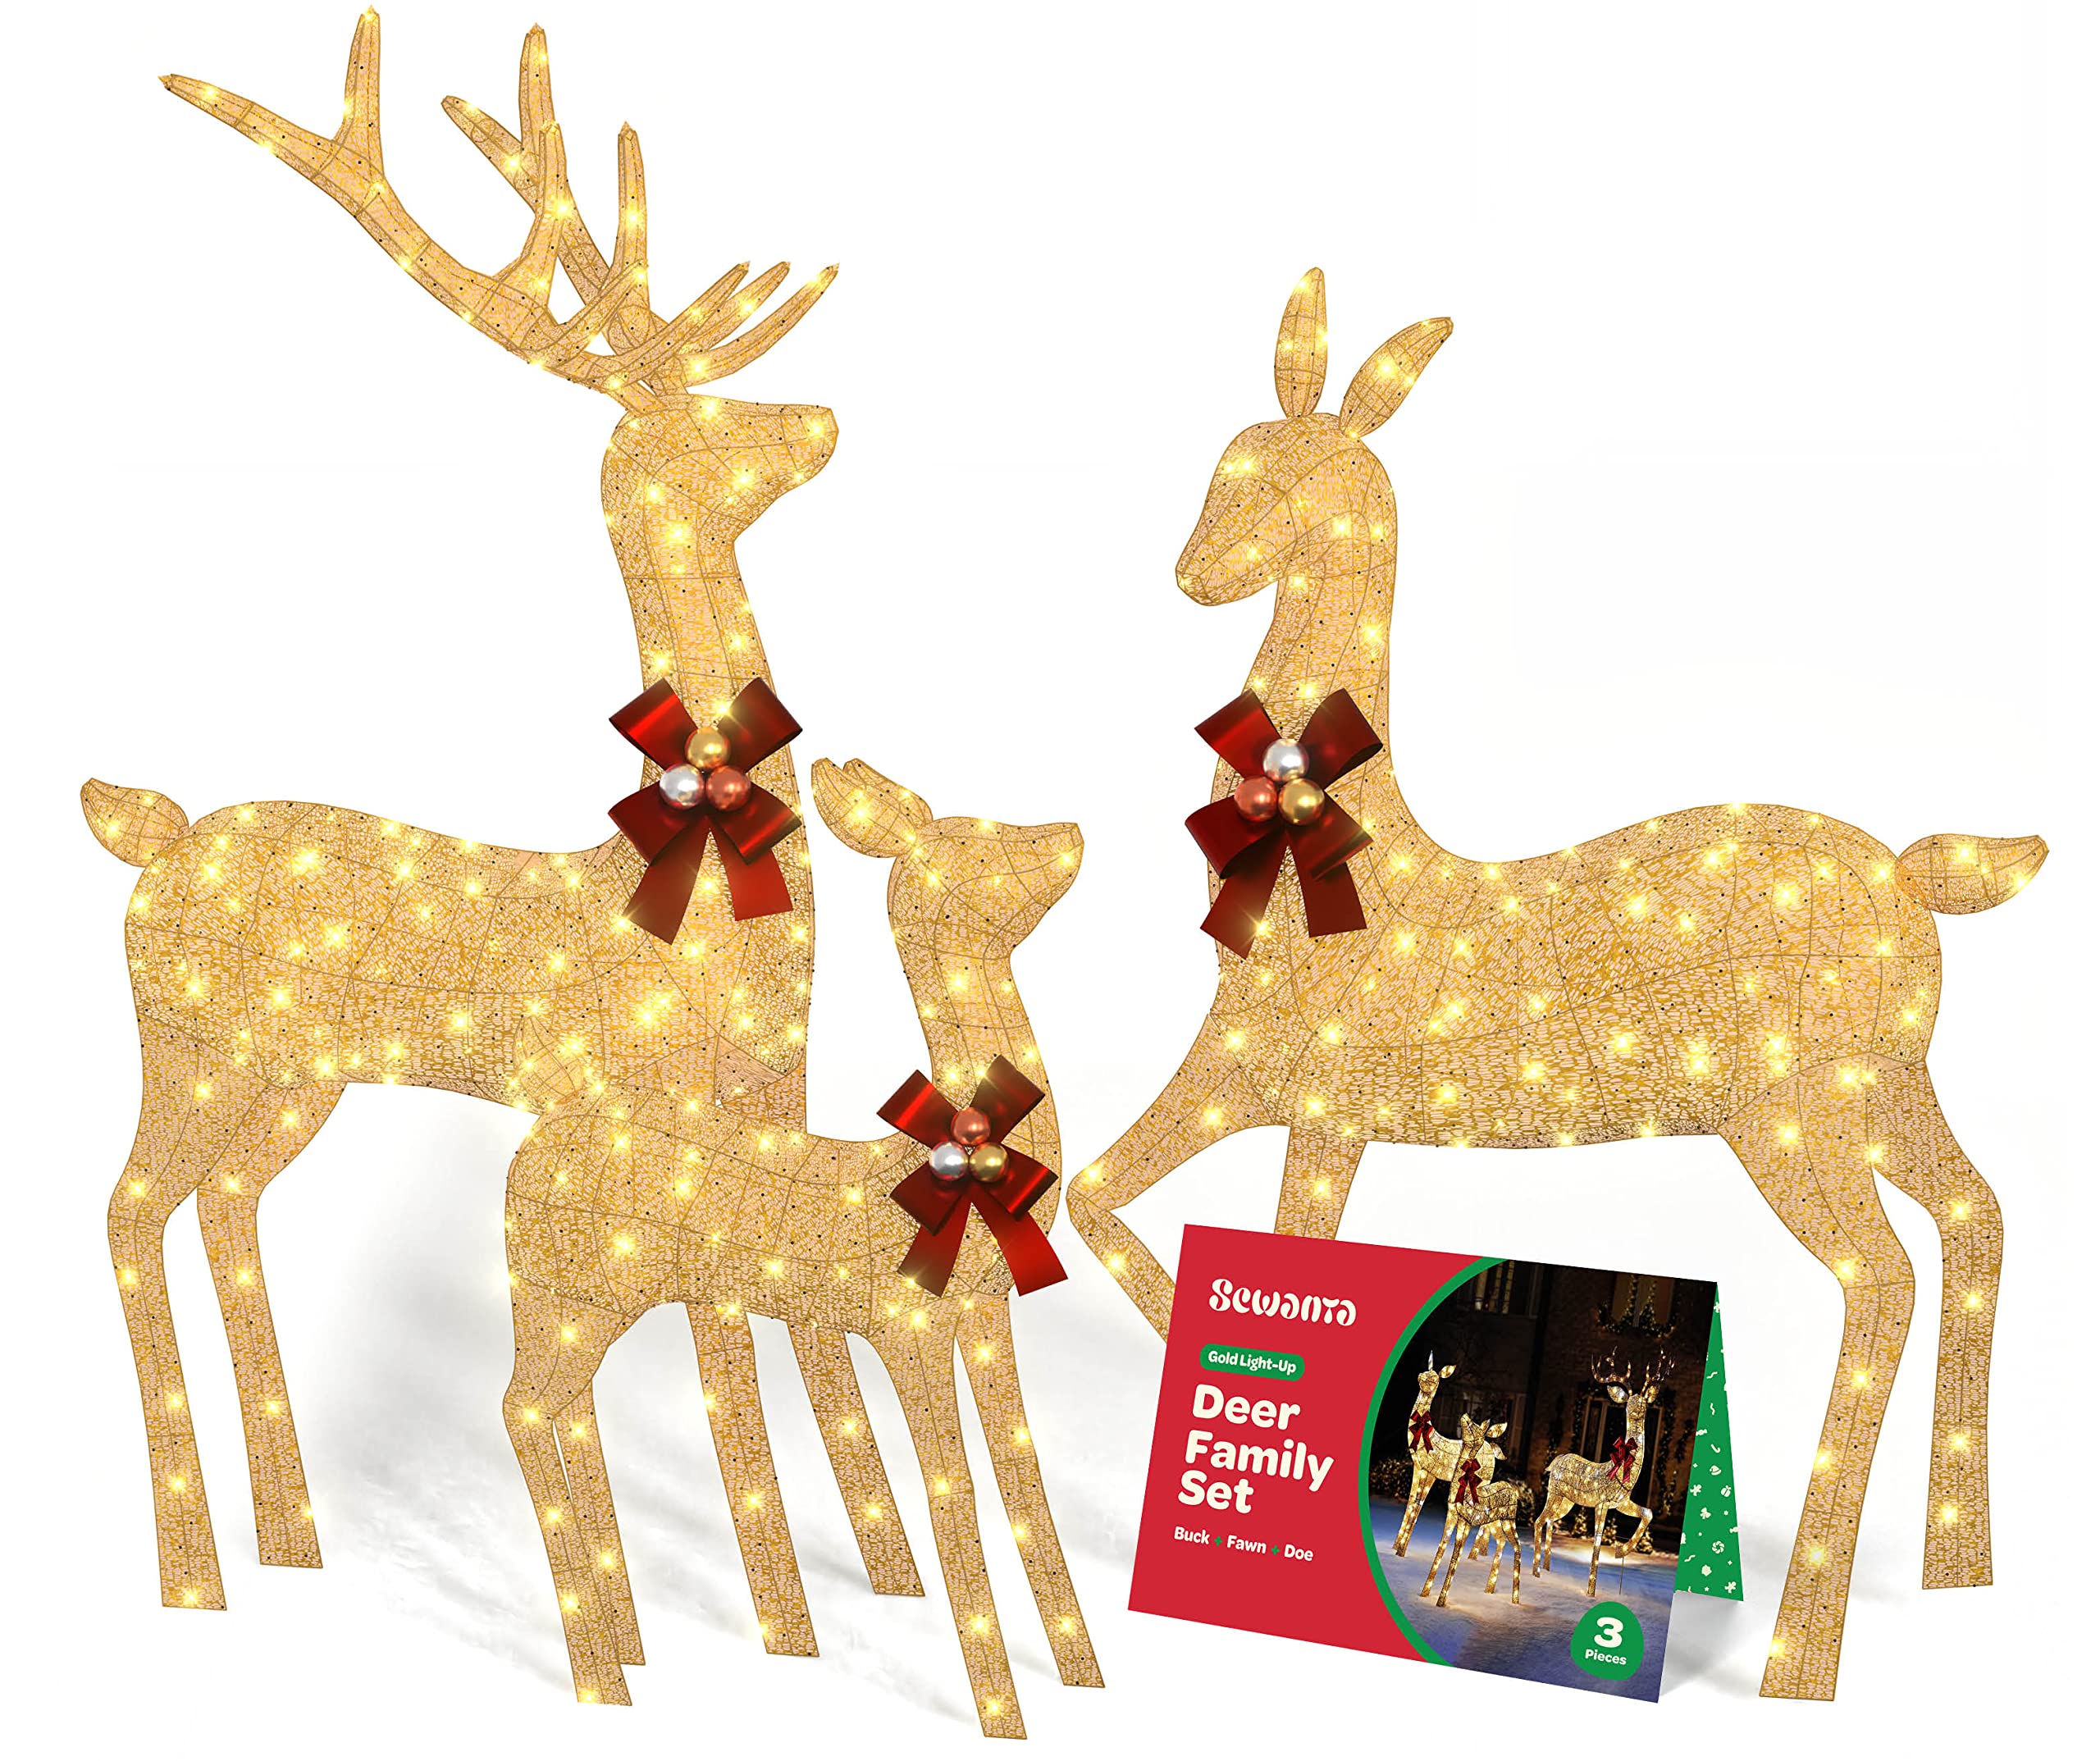 Impressive Reindeer Christmas Decoration Family [Set of 3] Lighted with 365 LED Lights Large all-Weather Christmas Outdoor Decoration Display (Buck Doe and Fawn) With Red Bows/Tie-Down Stakes - Gold. christmas decorations outdoor reindeer  - Like New